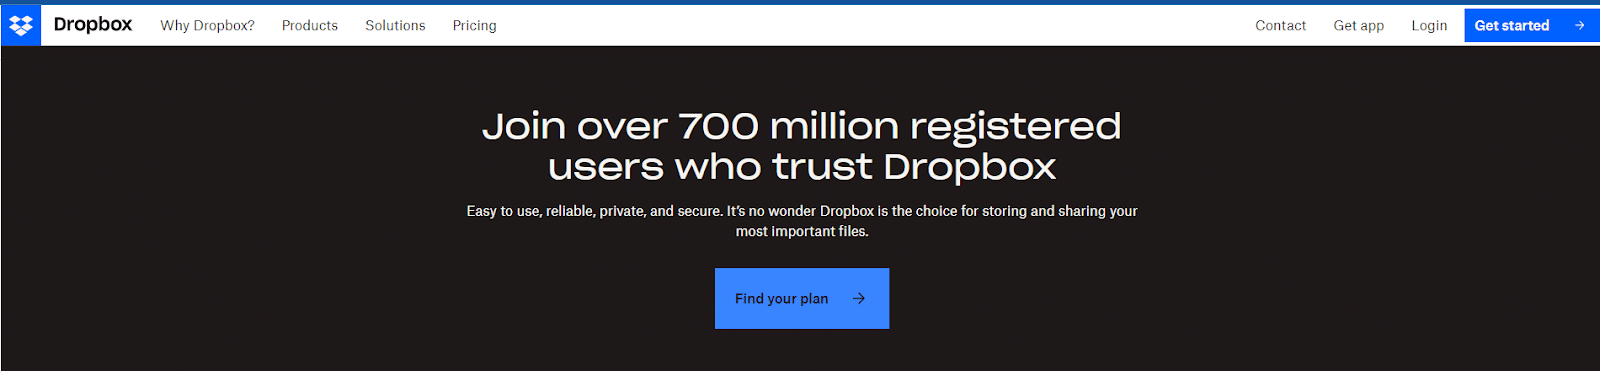 join over 700 million users who trust dropbox